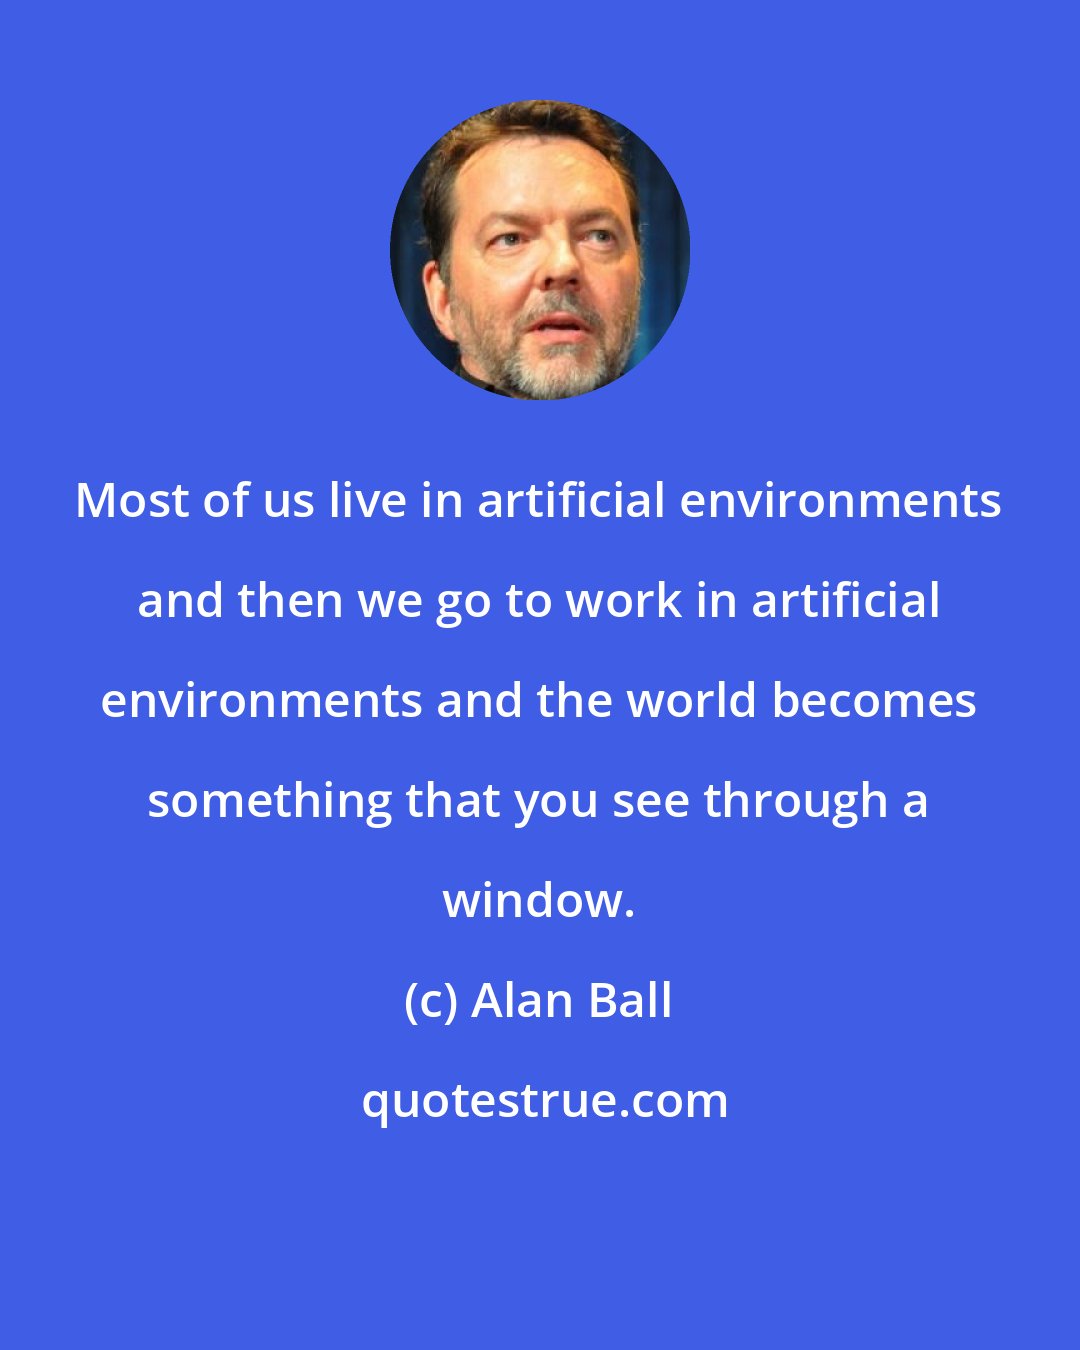 Alan Ball: Most of us live in artificial environments and then we go to work in artificial environments and the world becomes something that you see through a window.